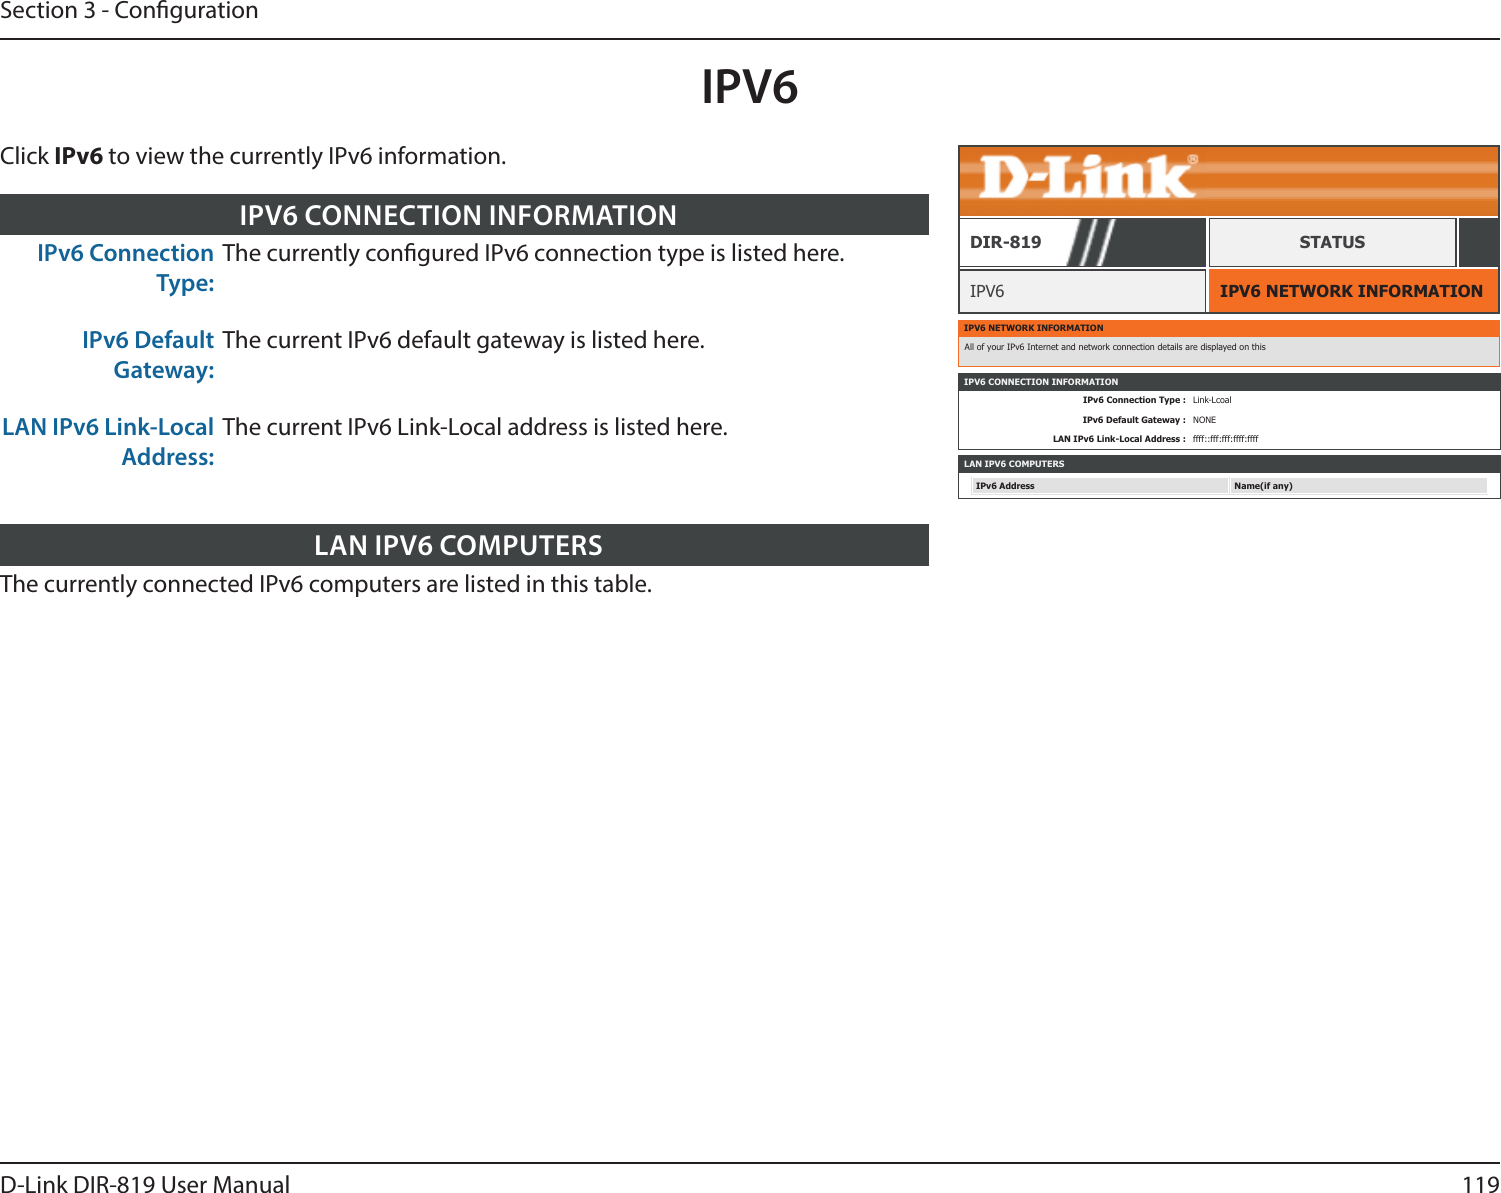 119D-Link DIR-819 User ManualSection 3 - CongurationIPV6IPV6 NETWORK INFORMATIONIPV6DIR-819 STATUSIPv6 Connection Type:The currently congured IPv6 connection type is listed here.IPv6 Default Gateway:The current IPv6 default gateway is listed here.LAN IPv6 Link-Local Address:The current IPv6 Link-Local address is listed here.IPV6 CONNECTION INFORMATIONThe currently connected IPv6 computers are listed in this table.LAN IPV6 COMPUTERSIPV6 NETWORK INFORMATIONAll of your IPv6 Internet and network connection details are displayed on thisIPV6 CONNECTION INFORMATIONIPv6 Connection Type : Link-LcoalIPv6 Default Gateway : NONELAN IPv6 Link-Local Address : ffff::fff:fff:ffff:ffffLAN IPV6 COMPUTERSIPv6 Address Name(if any)Click IPv6 to view the currently IPv6 information.